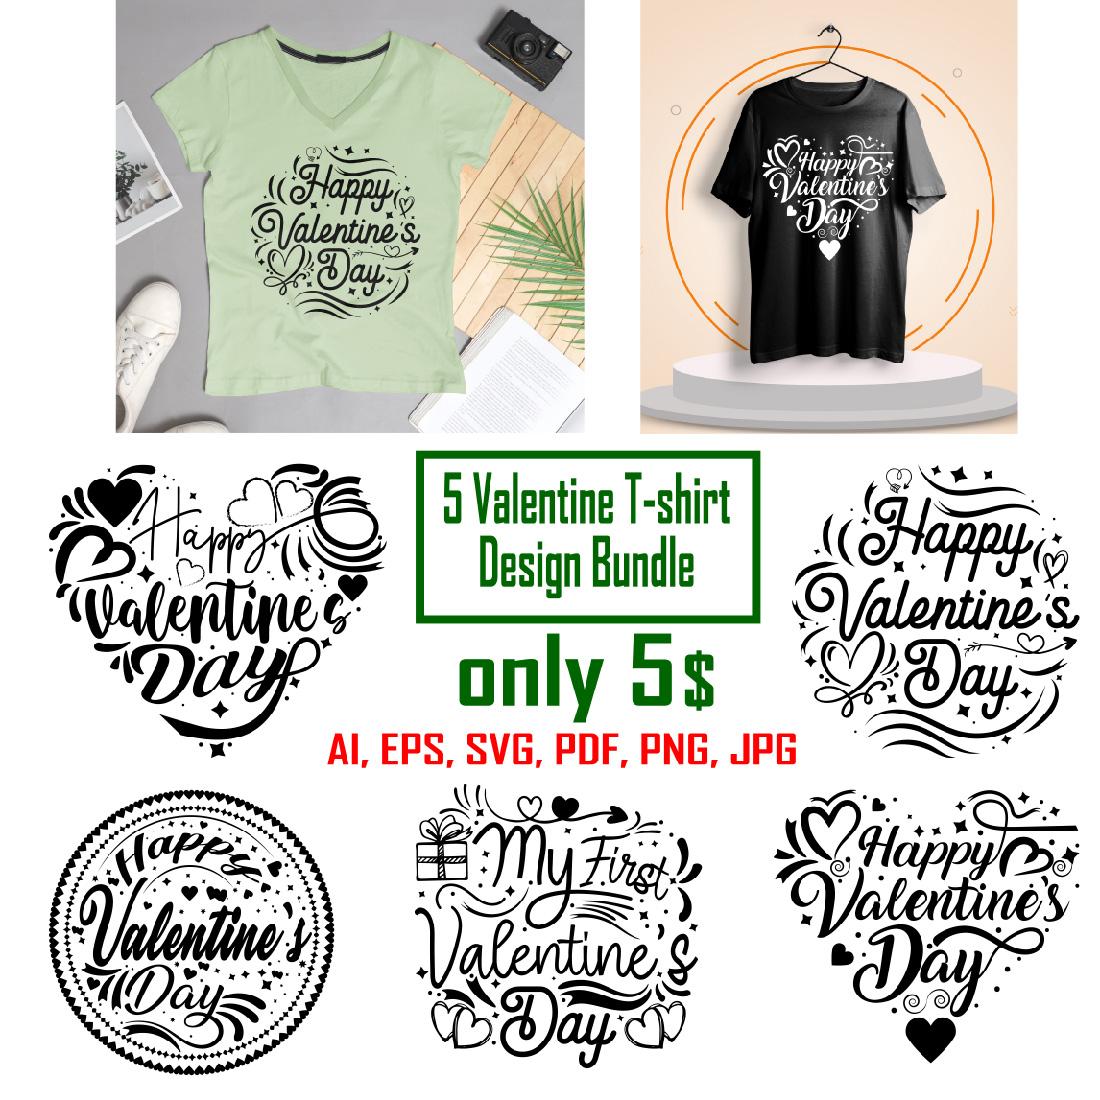 Valentines Day Typography, Vector T-Shirt Master Bundles Cover.